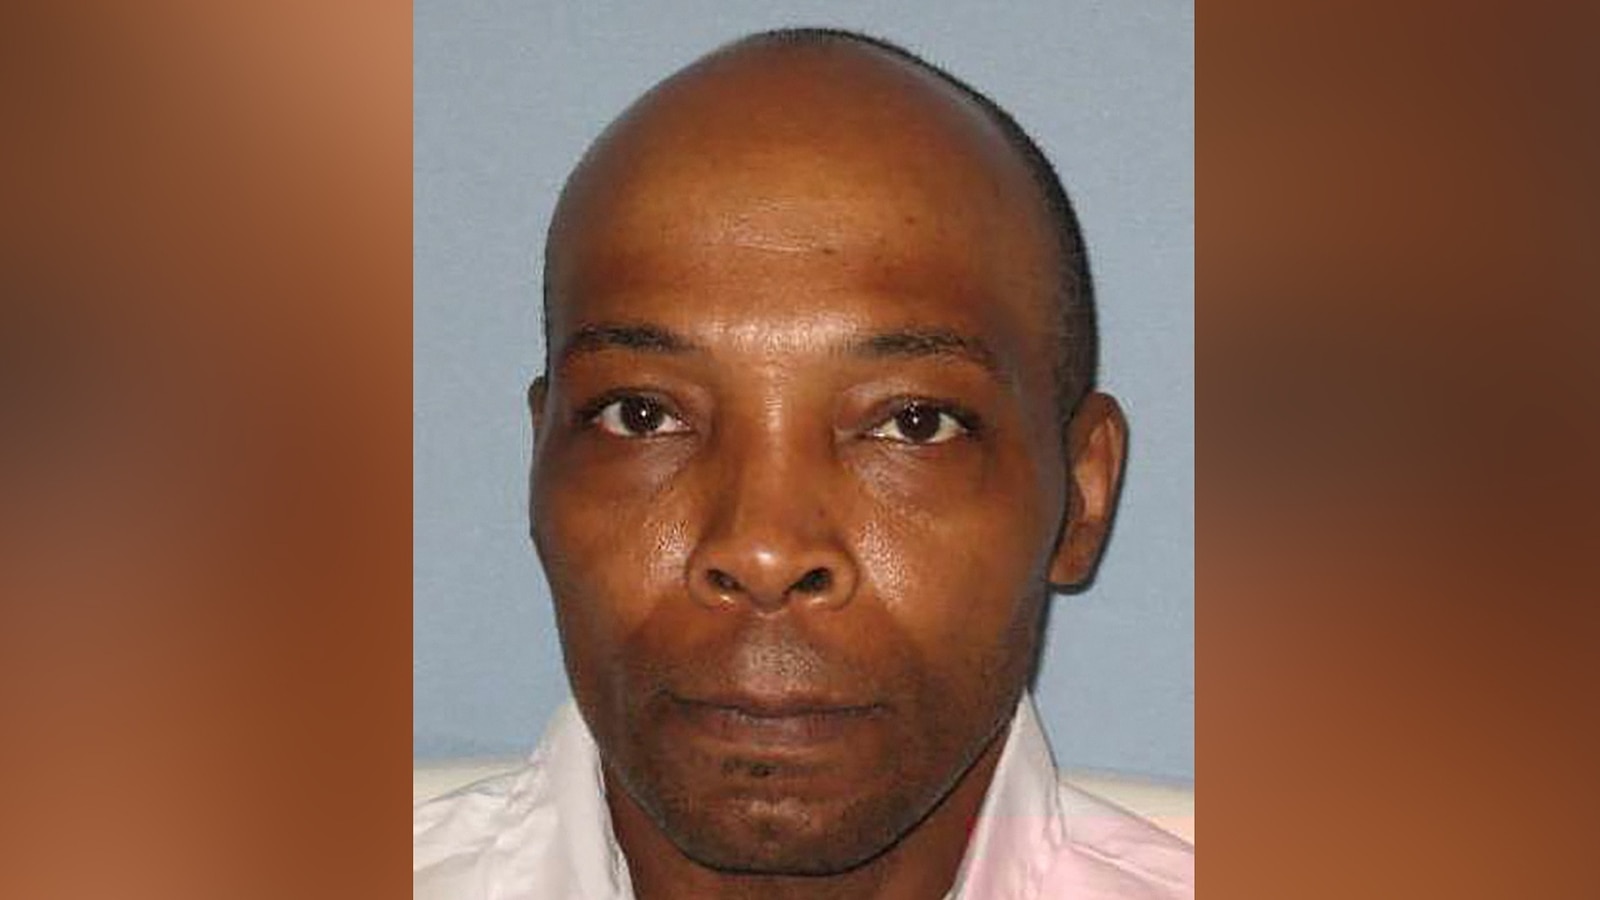 Inmate to be executed by lethal injection for 1998 murder of delivery driver